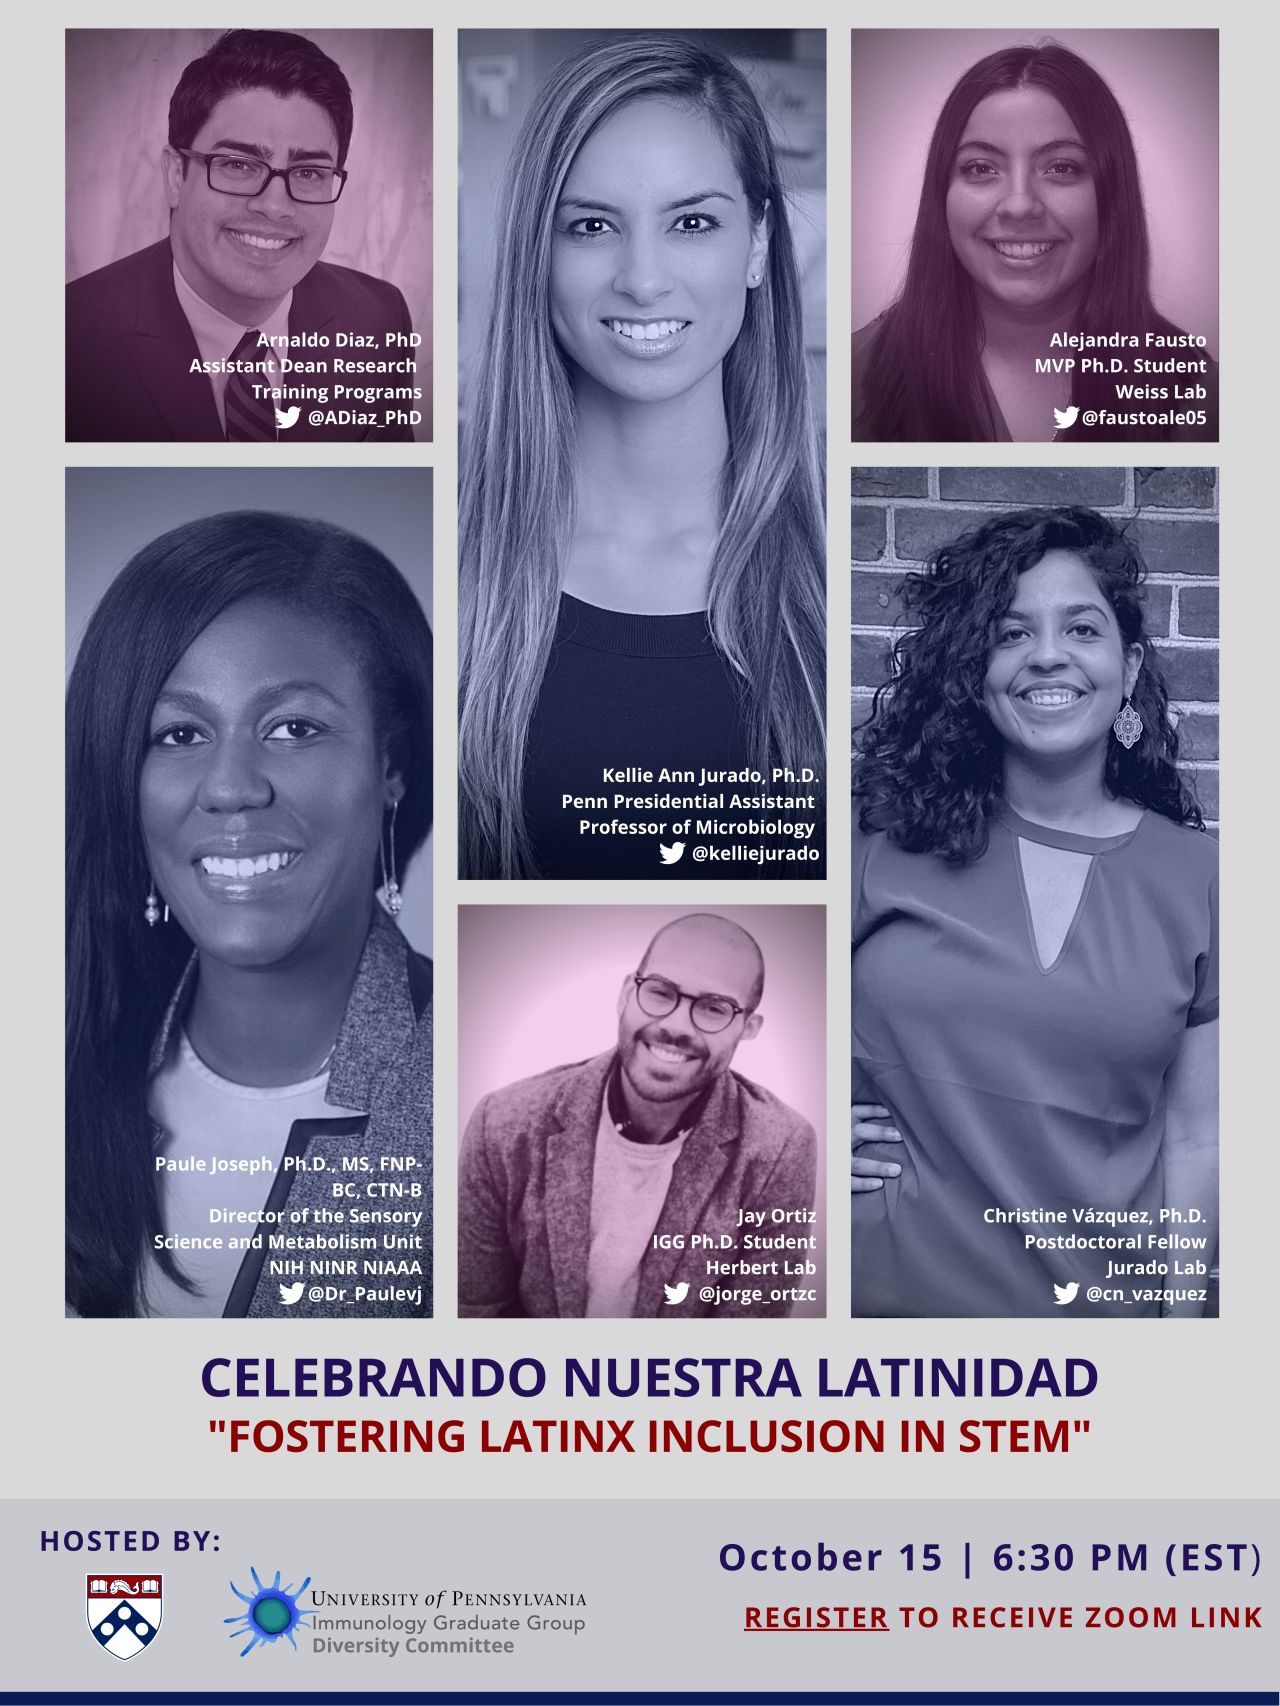 Fostering Latinx inclusion in STEM on October 15 at 6 30 pm